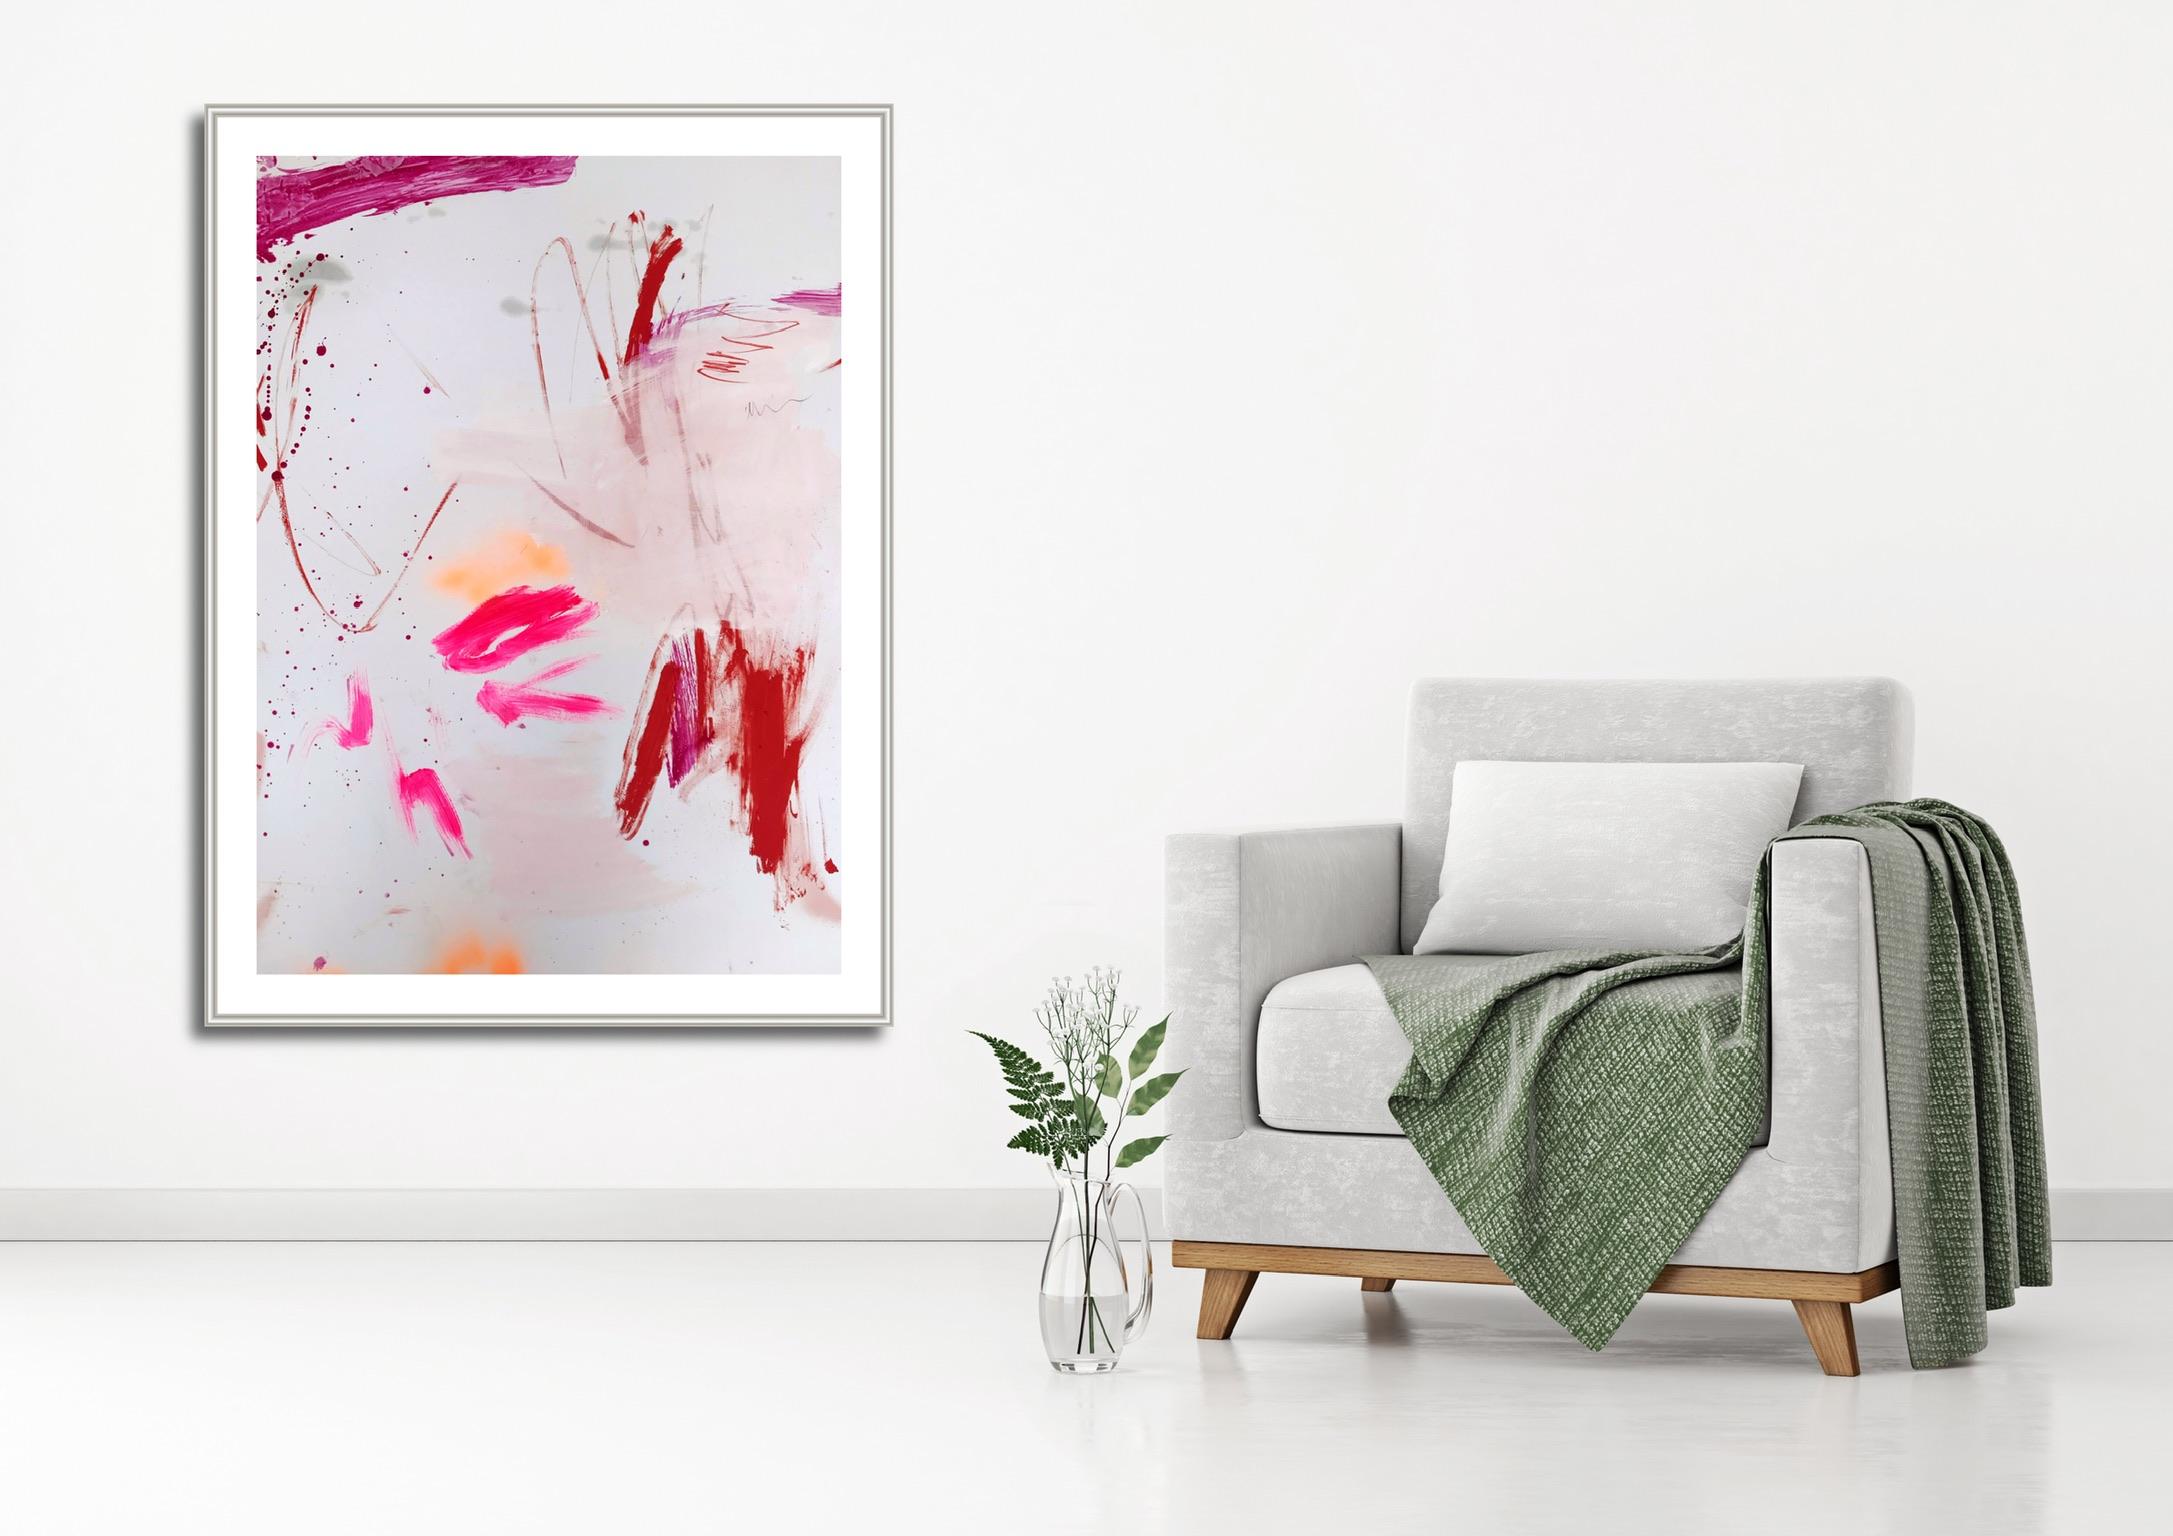 Rosy cheeks and bubbly 2 (Abstract work on paper) - Art by Manuela Karin Knaut